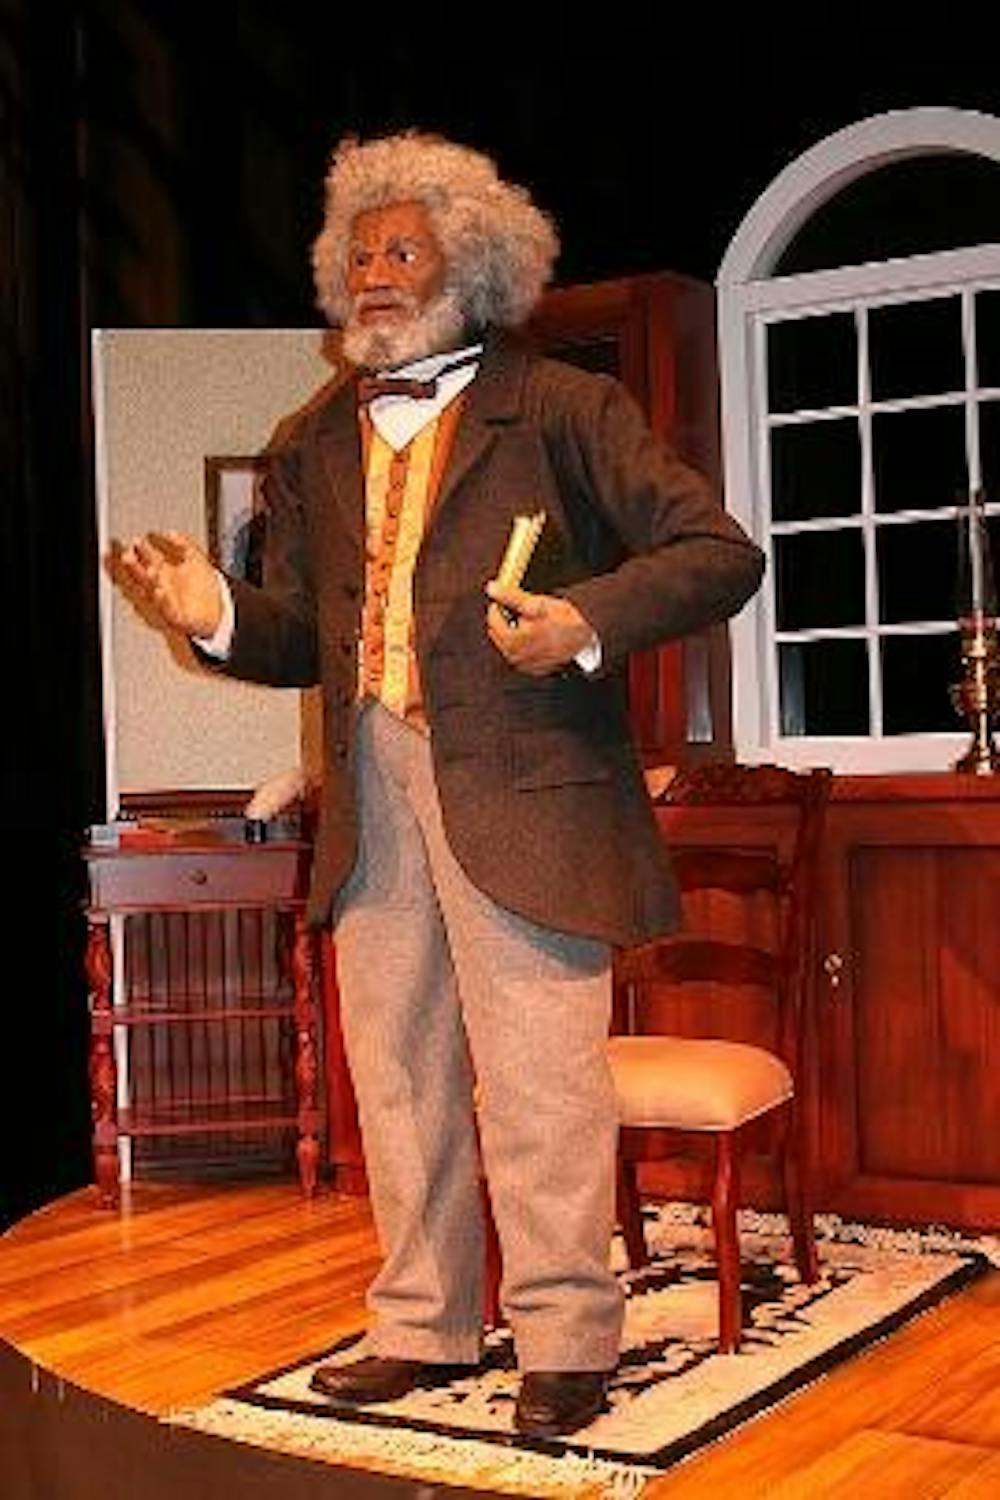 HISTORY COMES TO LIFE -  An animatronic Frederick Douglass will  regale both children and adults with excerpts from his most famous speeches as well as answers to a number of prepared questions. The exhibit recreates his Anacostia home's study in rich his